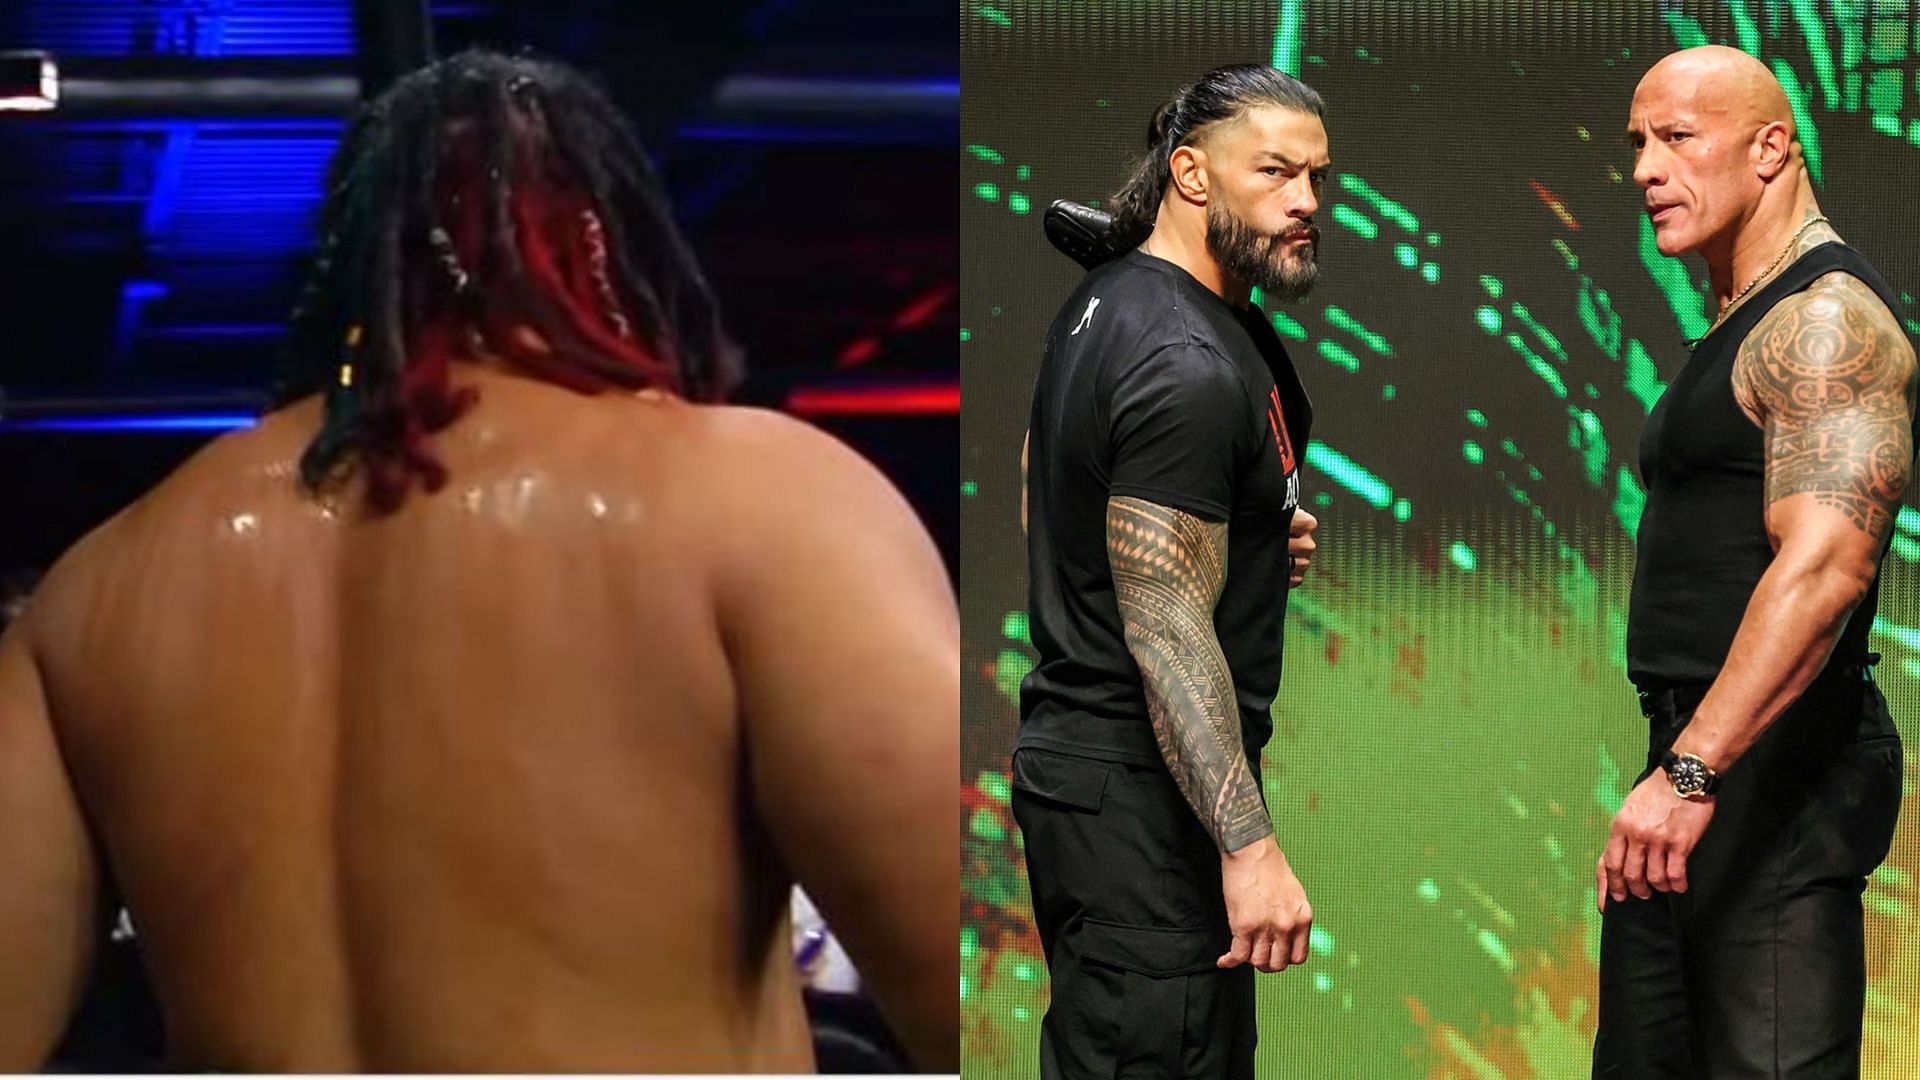 Jacob Fatu (left) and The Rock &amp; Undisputed WWE Universal Champion Roman Reigns (right)